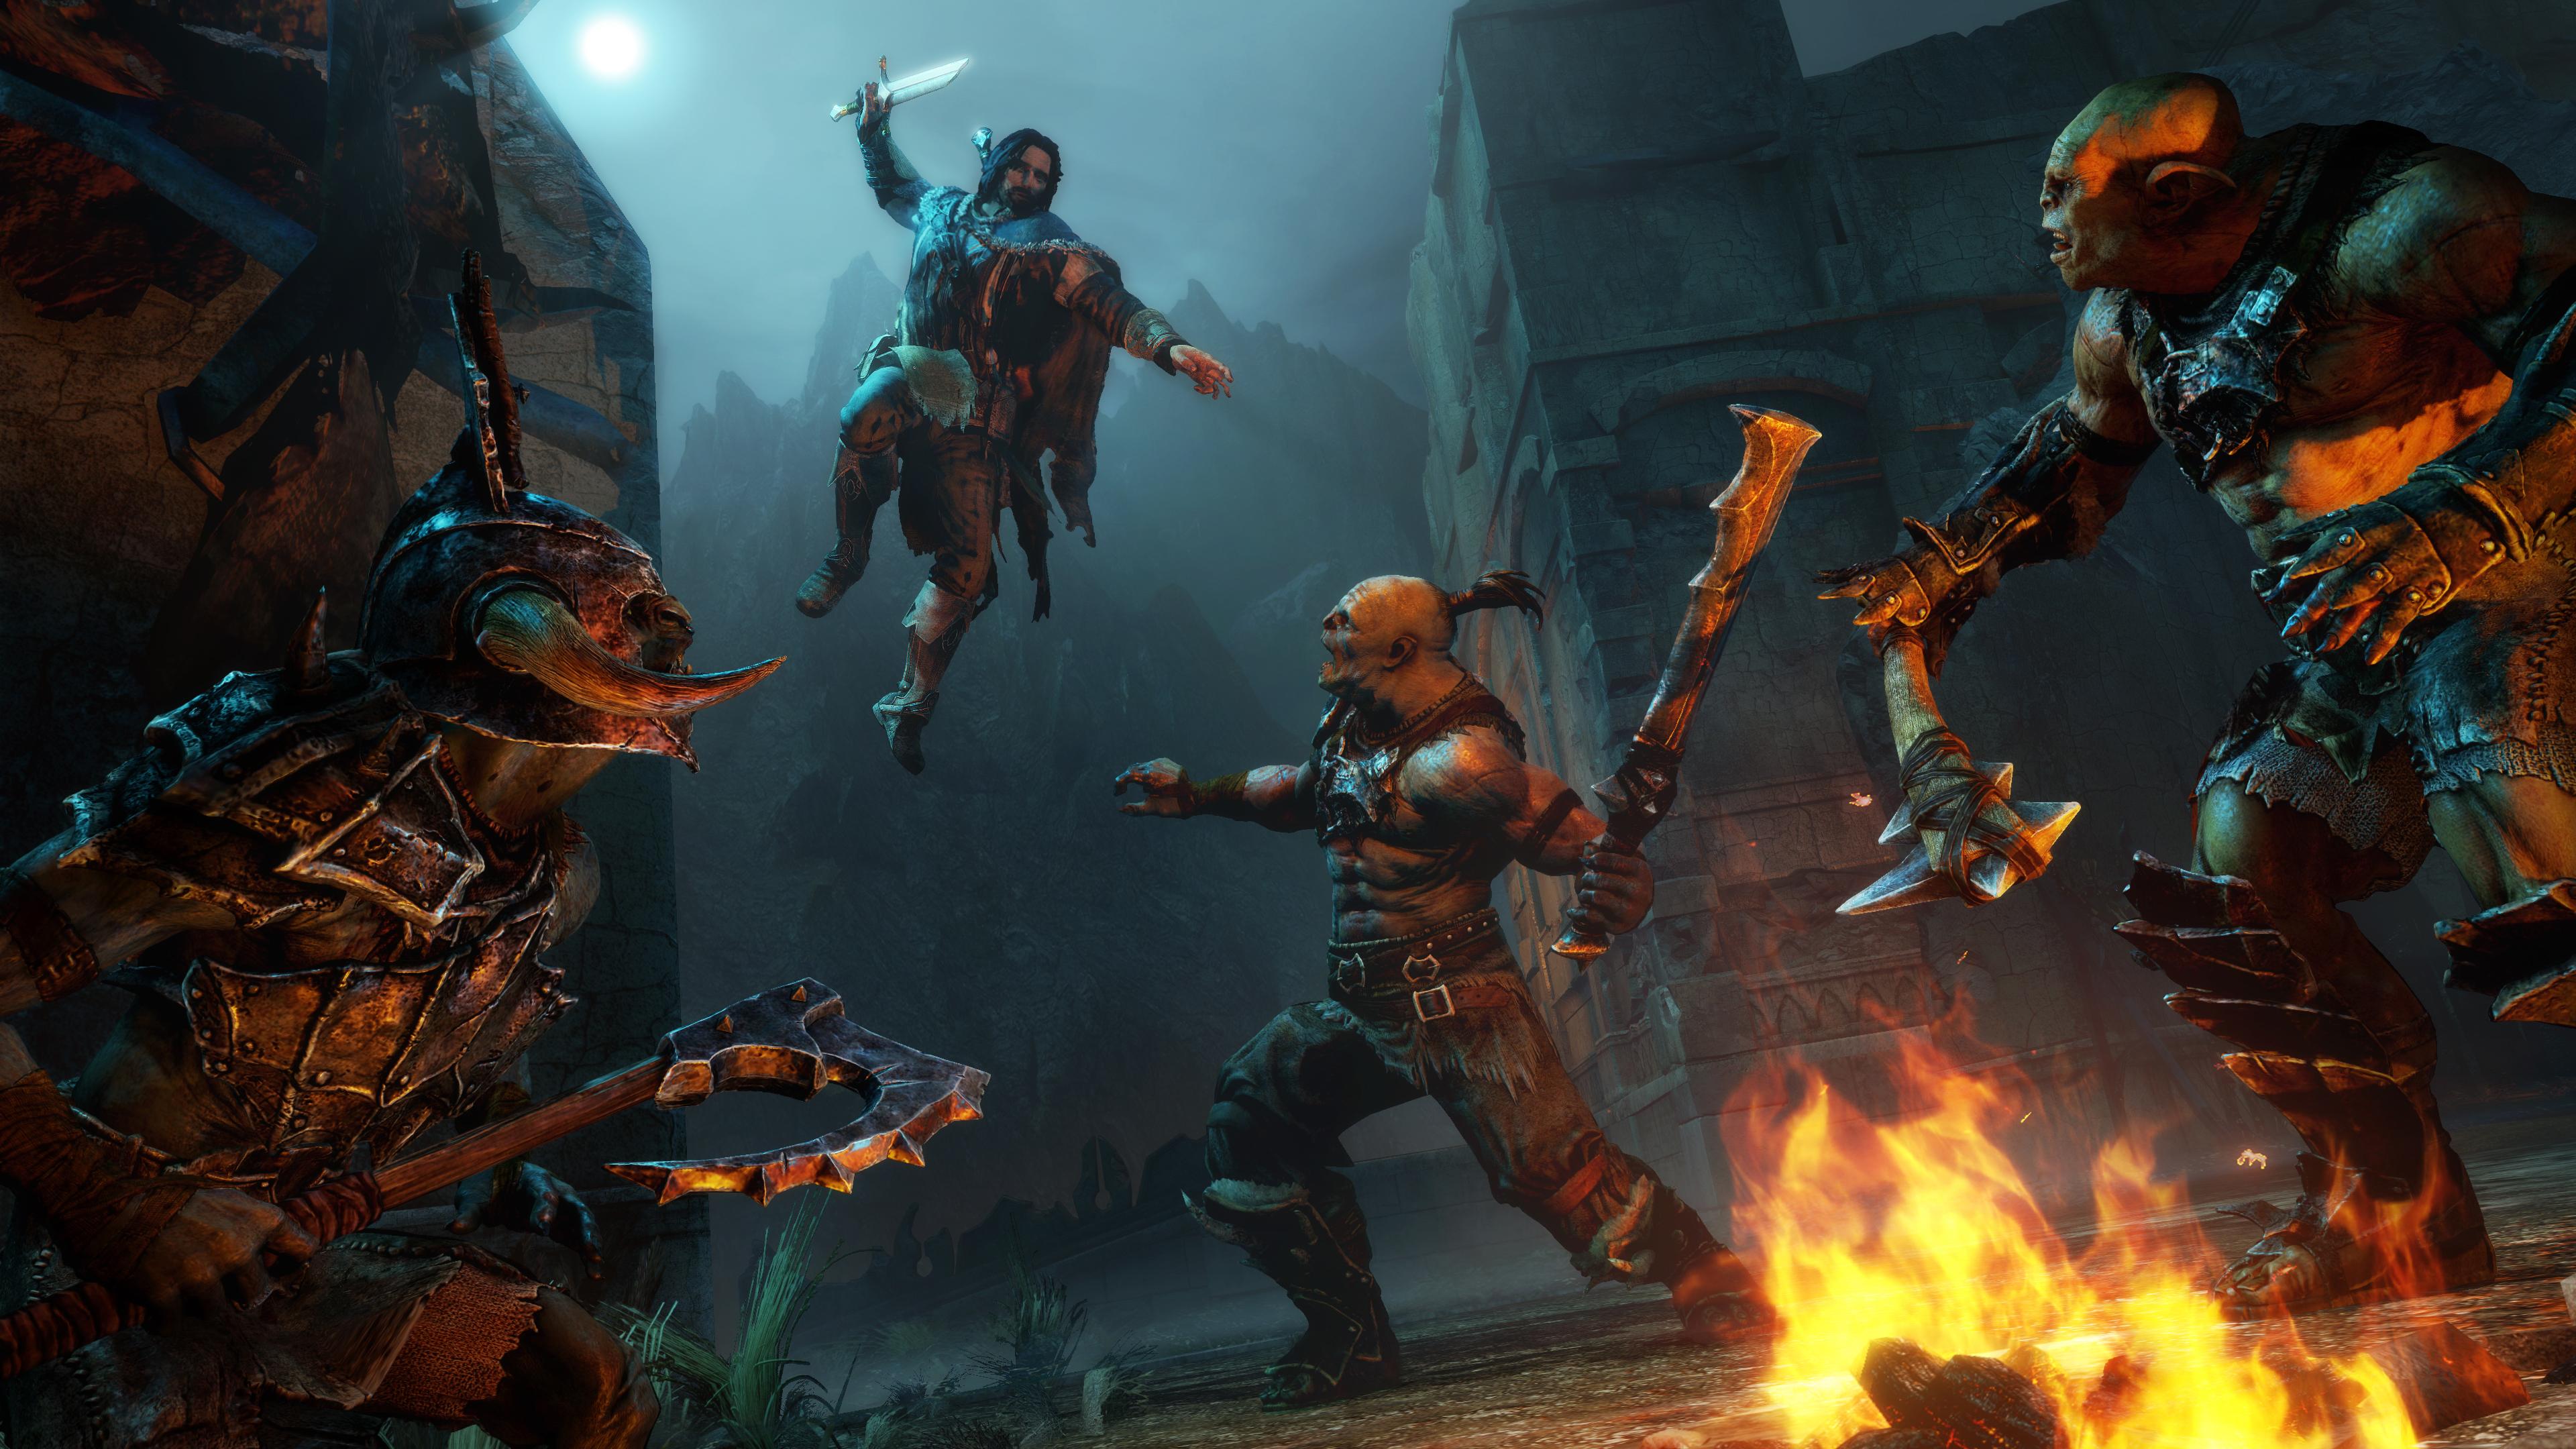 Does 'Middle-earth: Shadow of Mordor' live up to the hype?